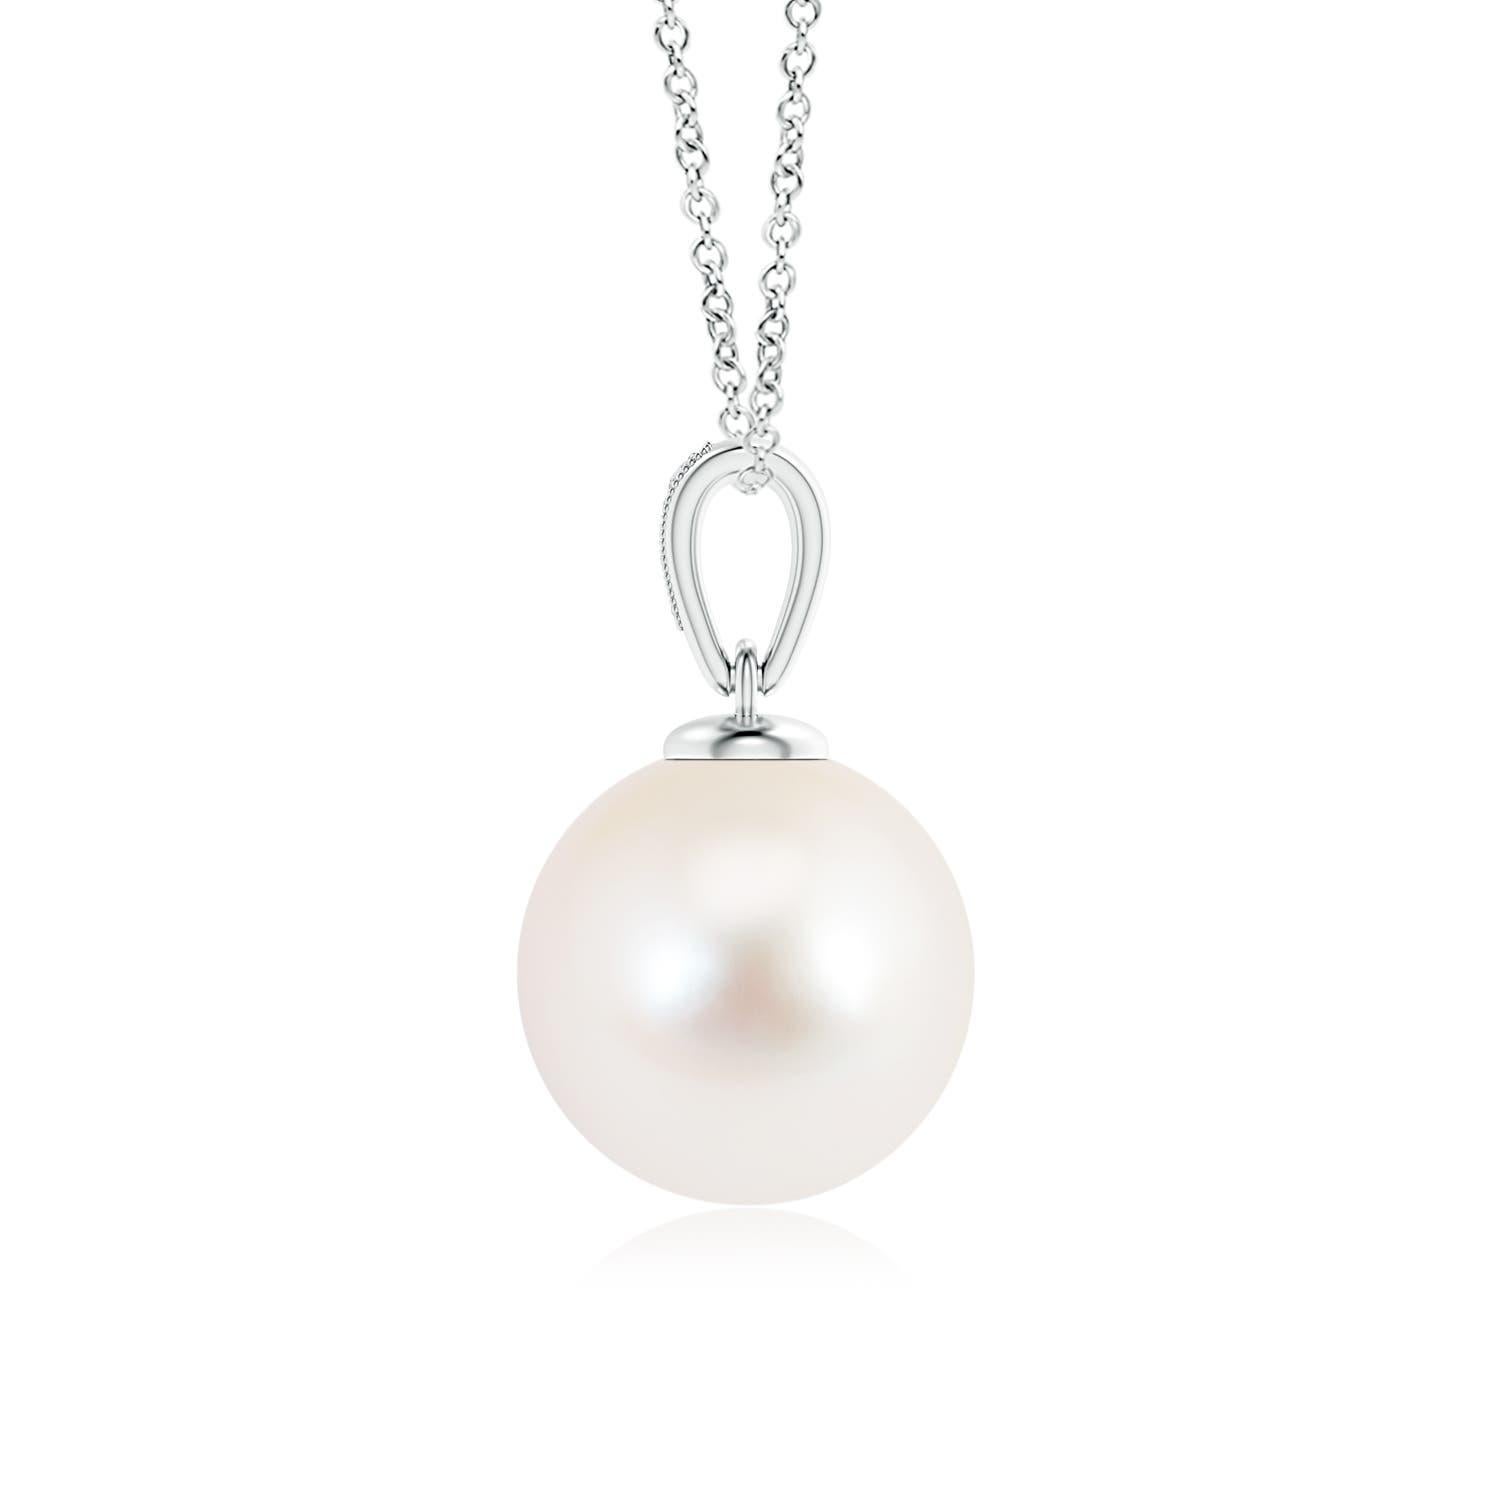 This 14K white gold solitaire pearl pendant offers a simple yet elegant look. The diamonds pavÃ© set on the bale offer a glittering effect to the lustrous pearl, while the milgrain detail on the bale lends a slight vintage touch. You can flaunt a